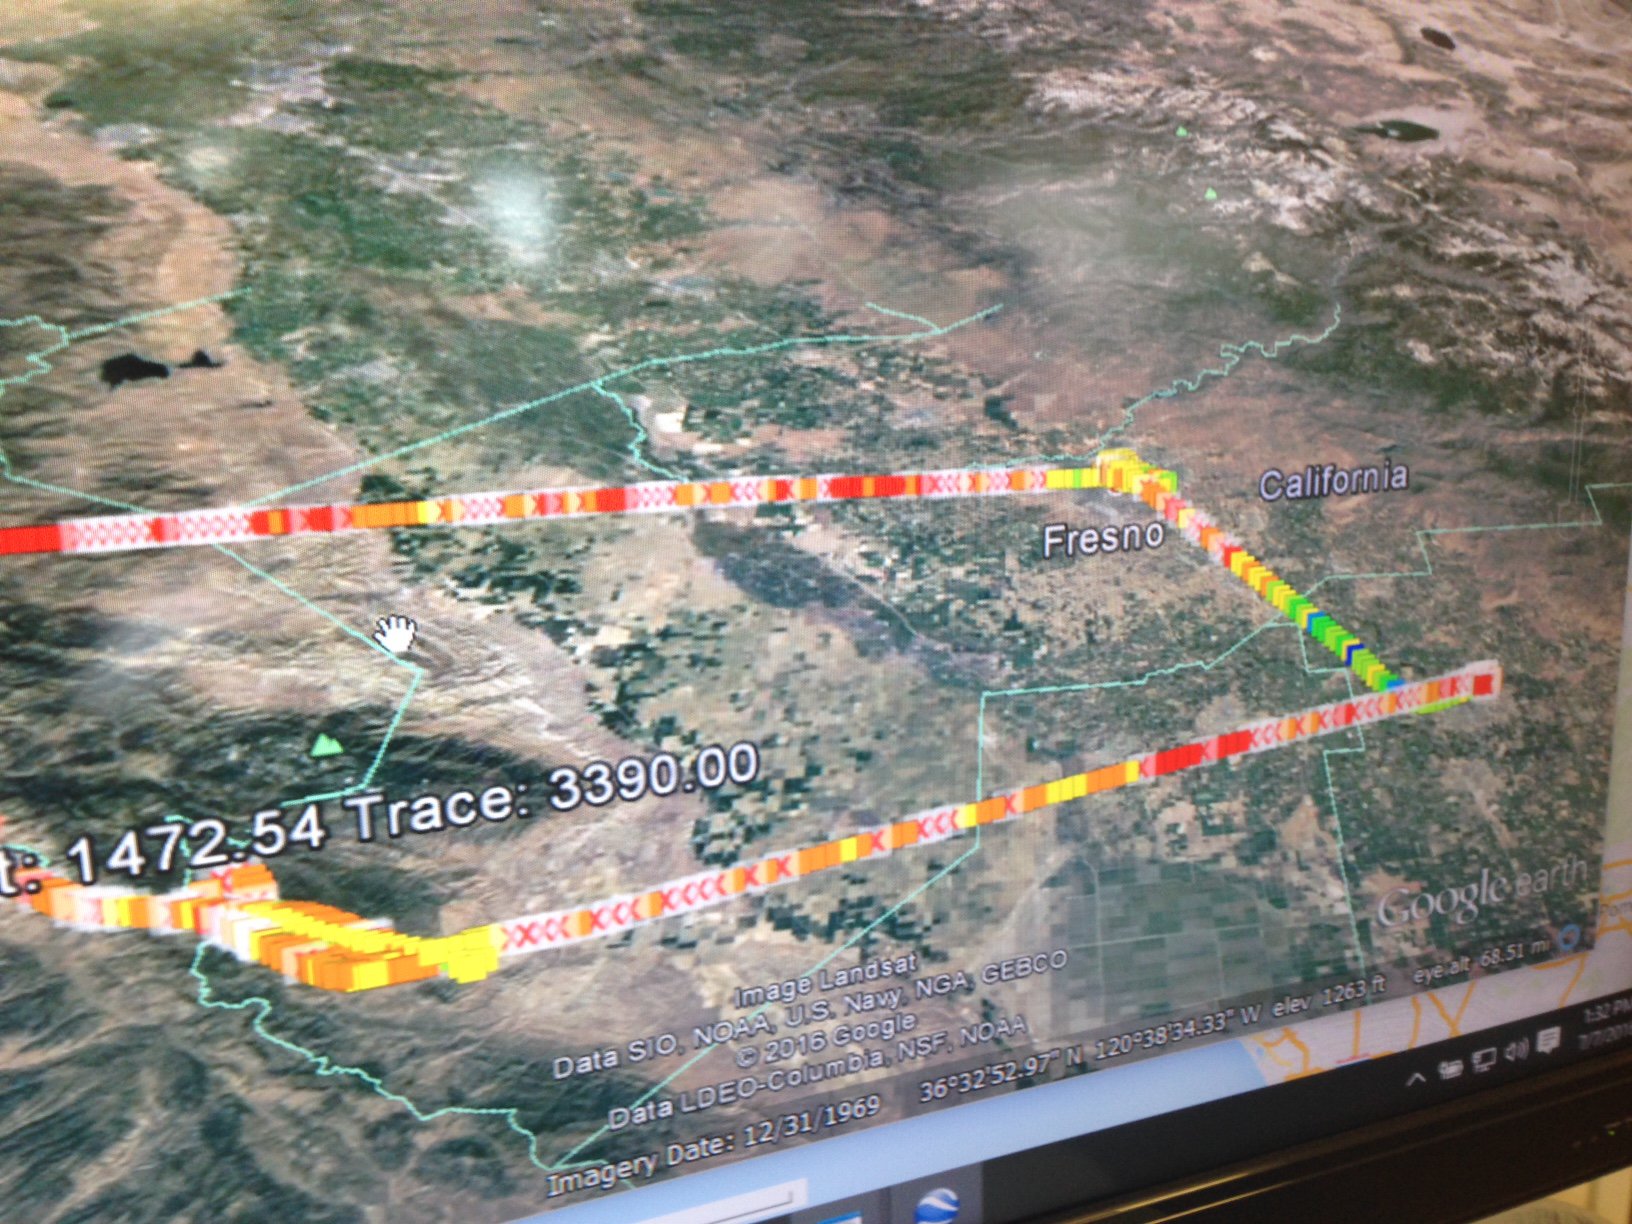 A computer screen is shown with Google Earth open on the screen. Satellite imagery of the California Central Valley is visible, overlain with lines that are colored various shades of red, orange, yellow, and green, with the color of each line changing many times.